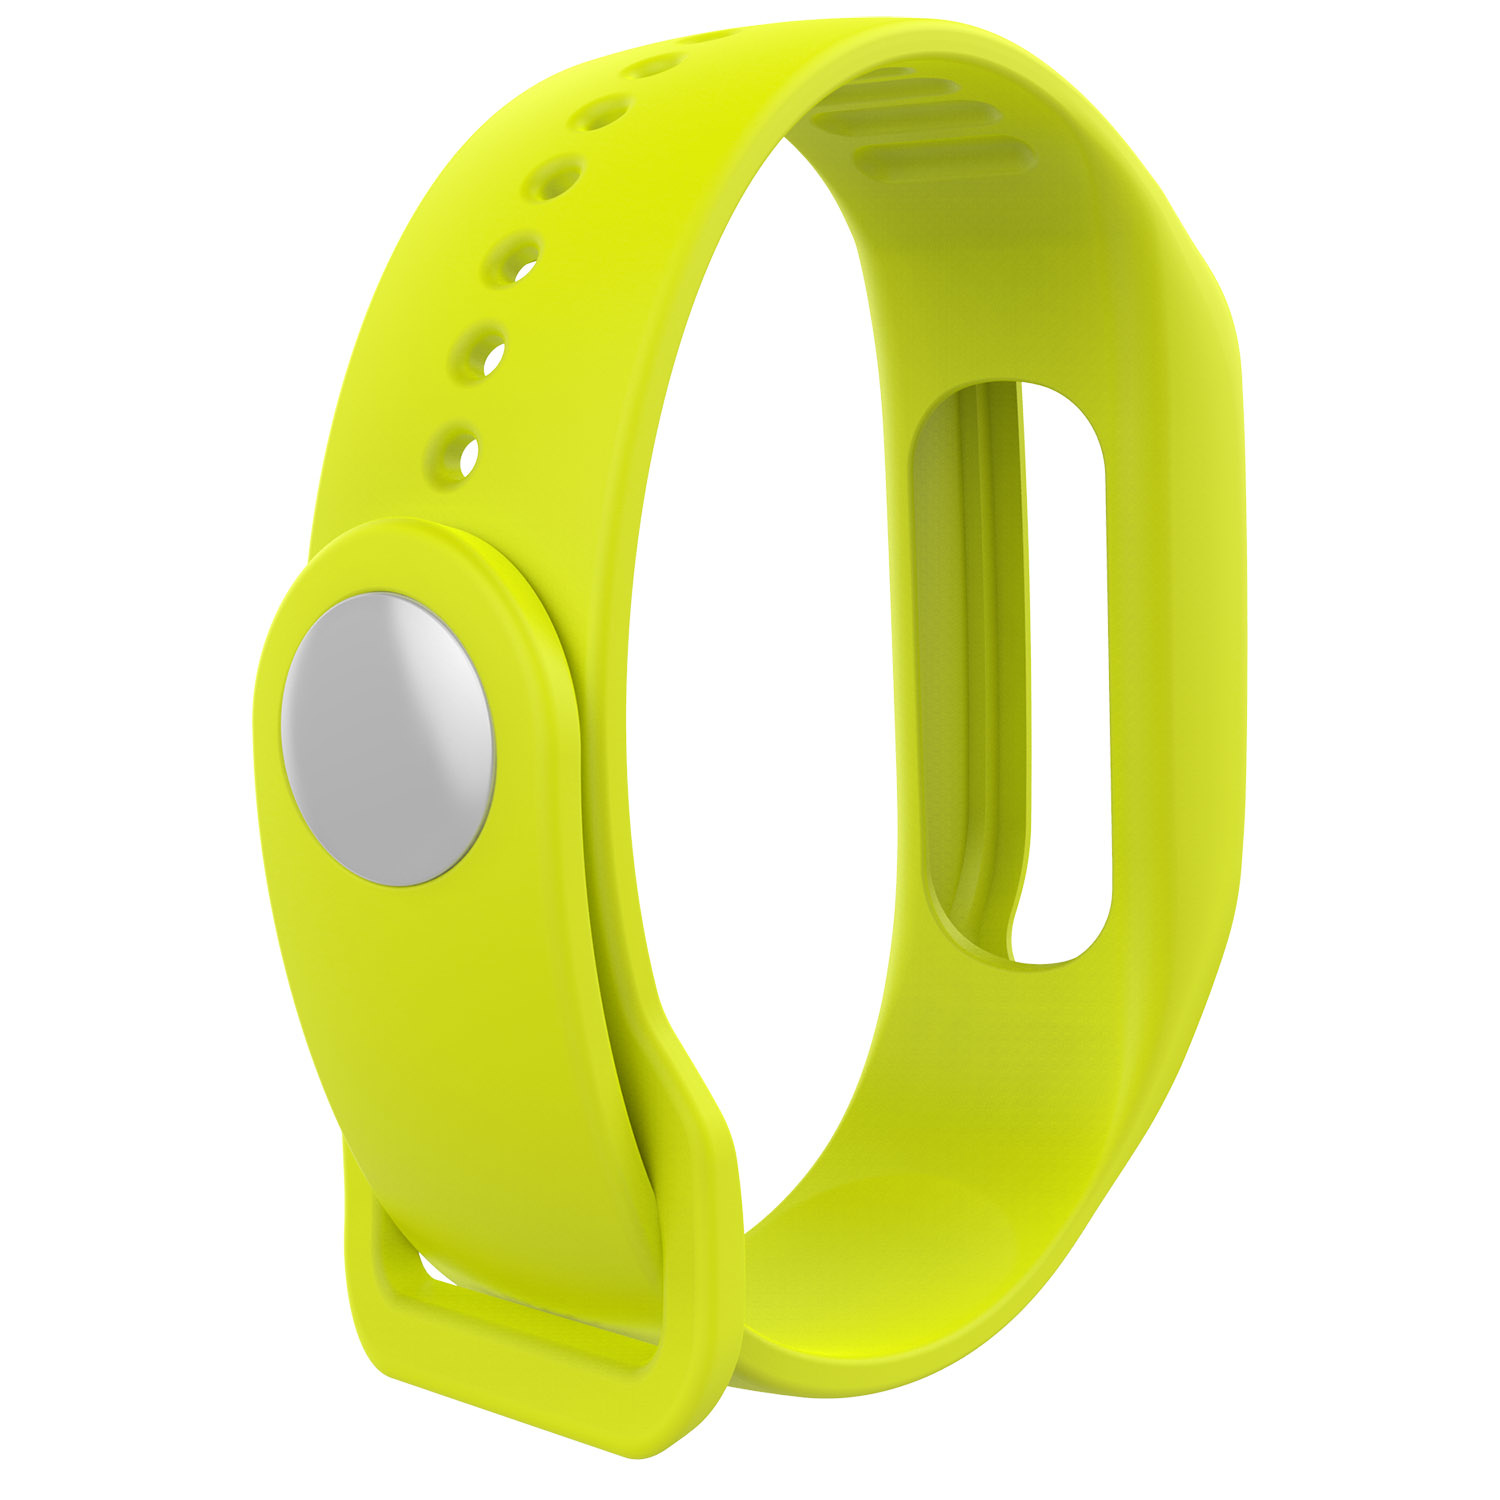 Tomtom Touch Sport Strap - Yellow